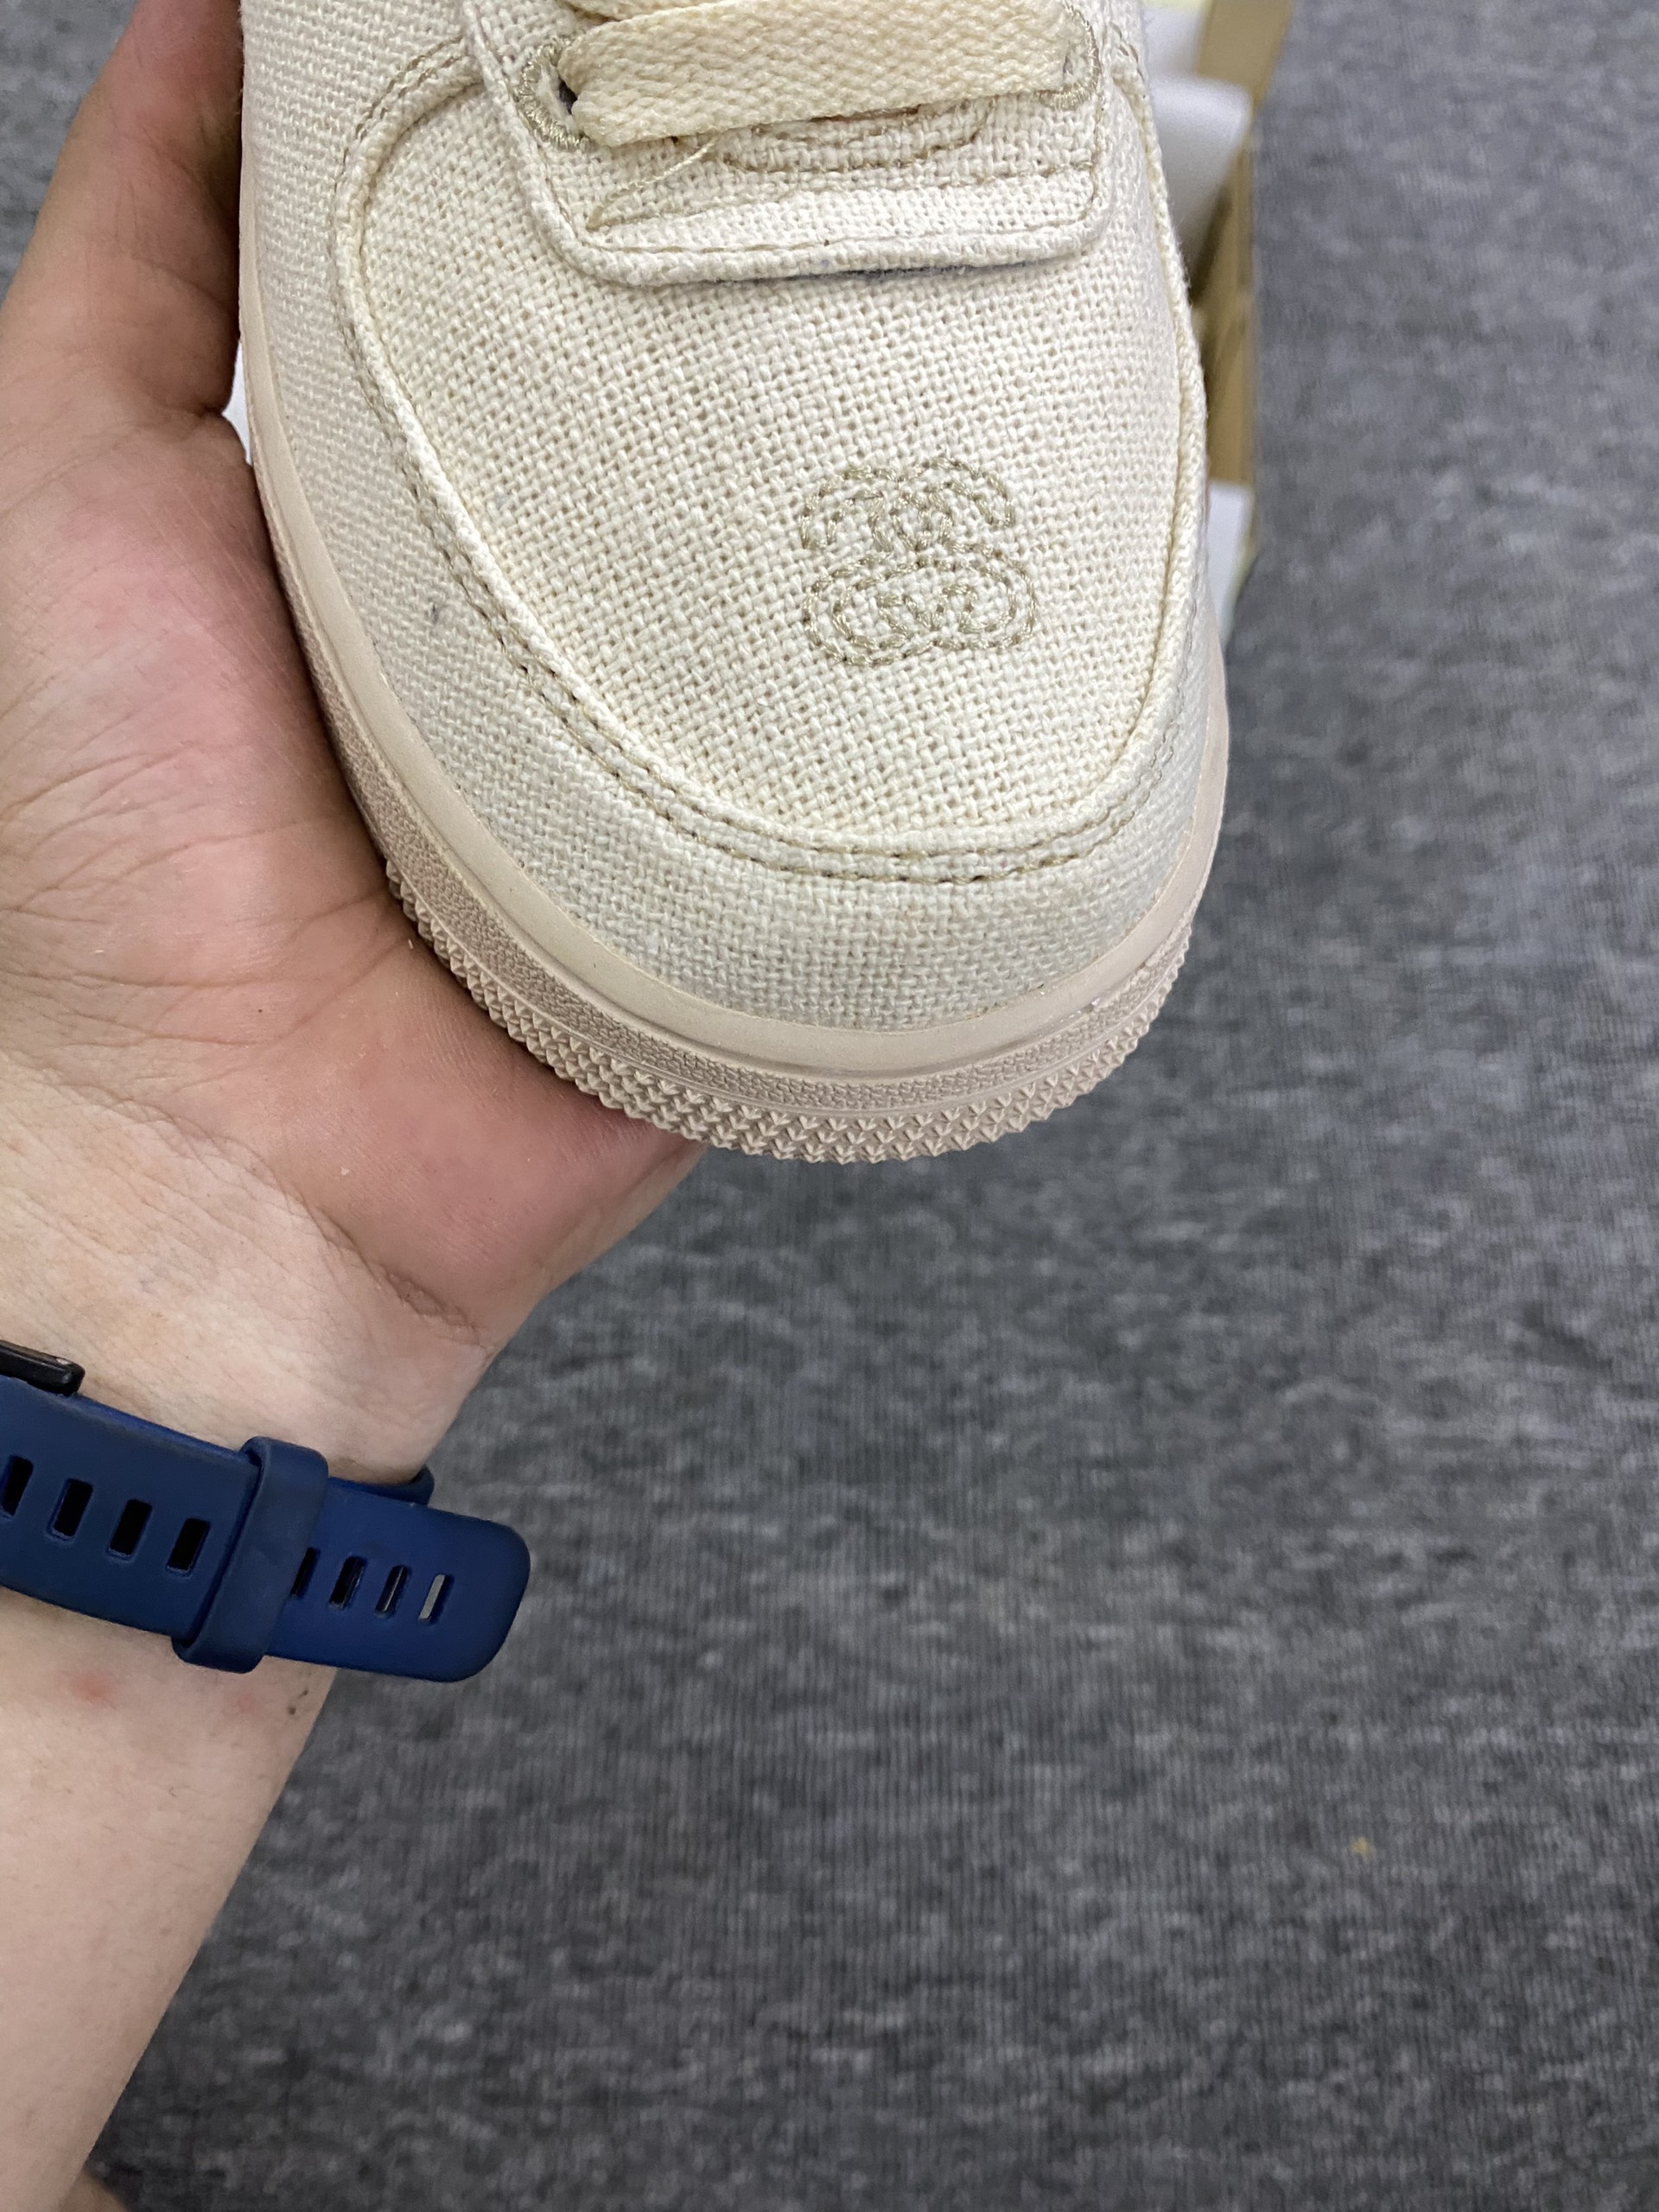 Nike Air Force 1 Stussy Fossil Rep 1:1